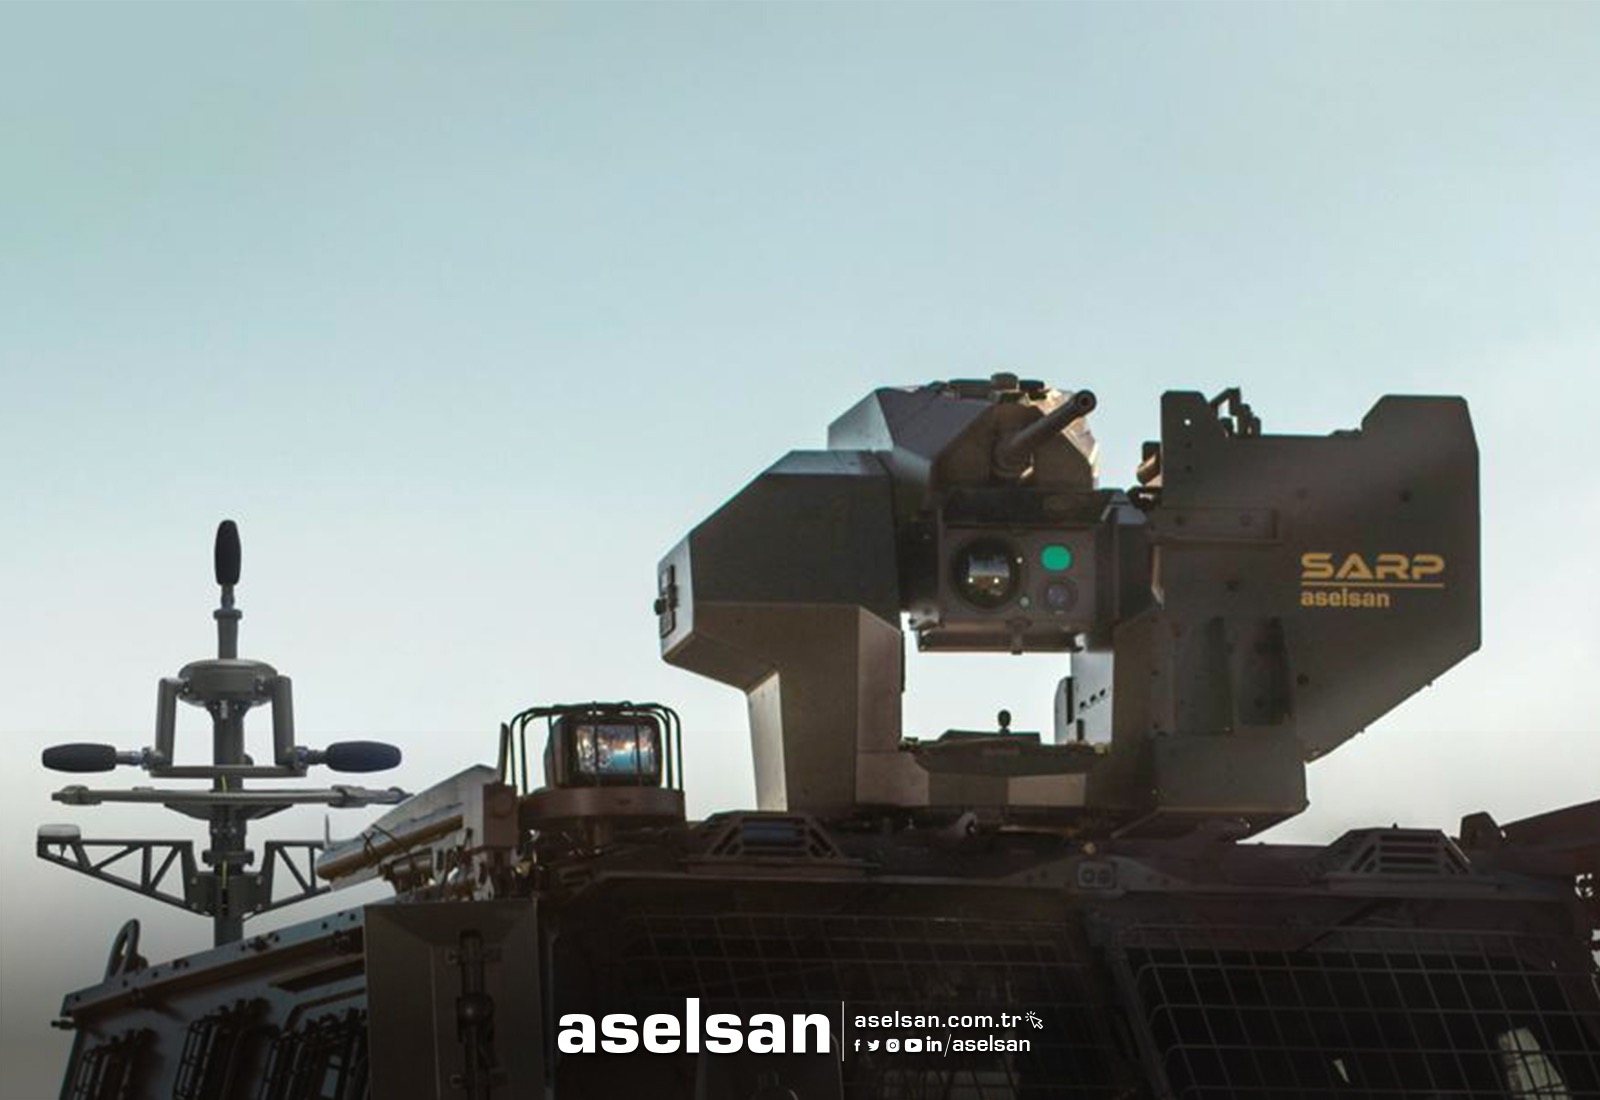 Aselsan Receives Contract for Stabilized Weapon Stations (RCWS) From NATO Member Nation